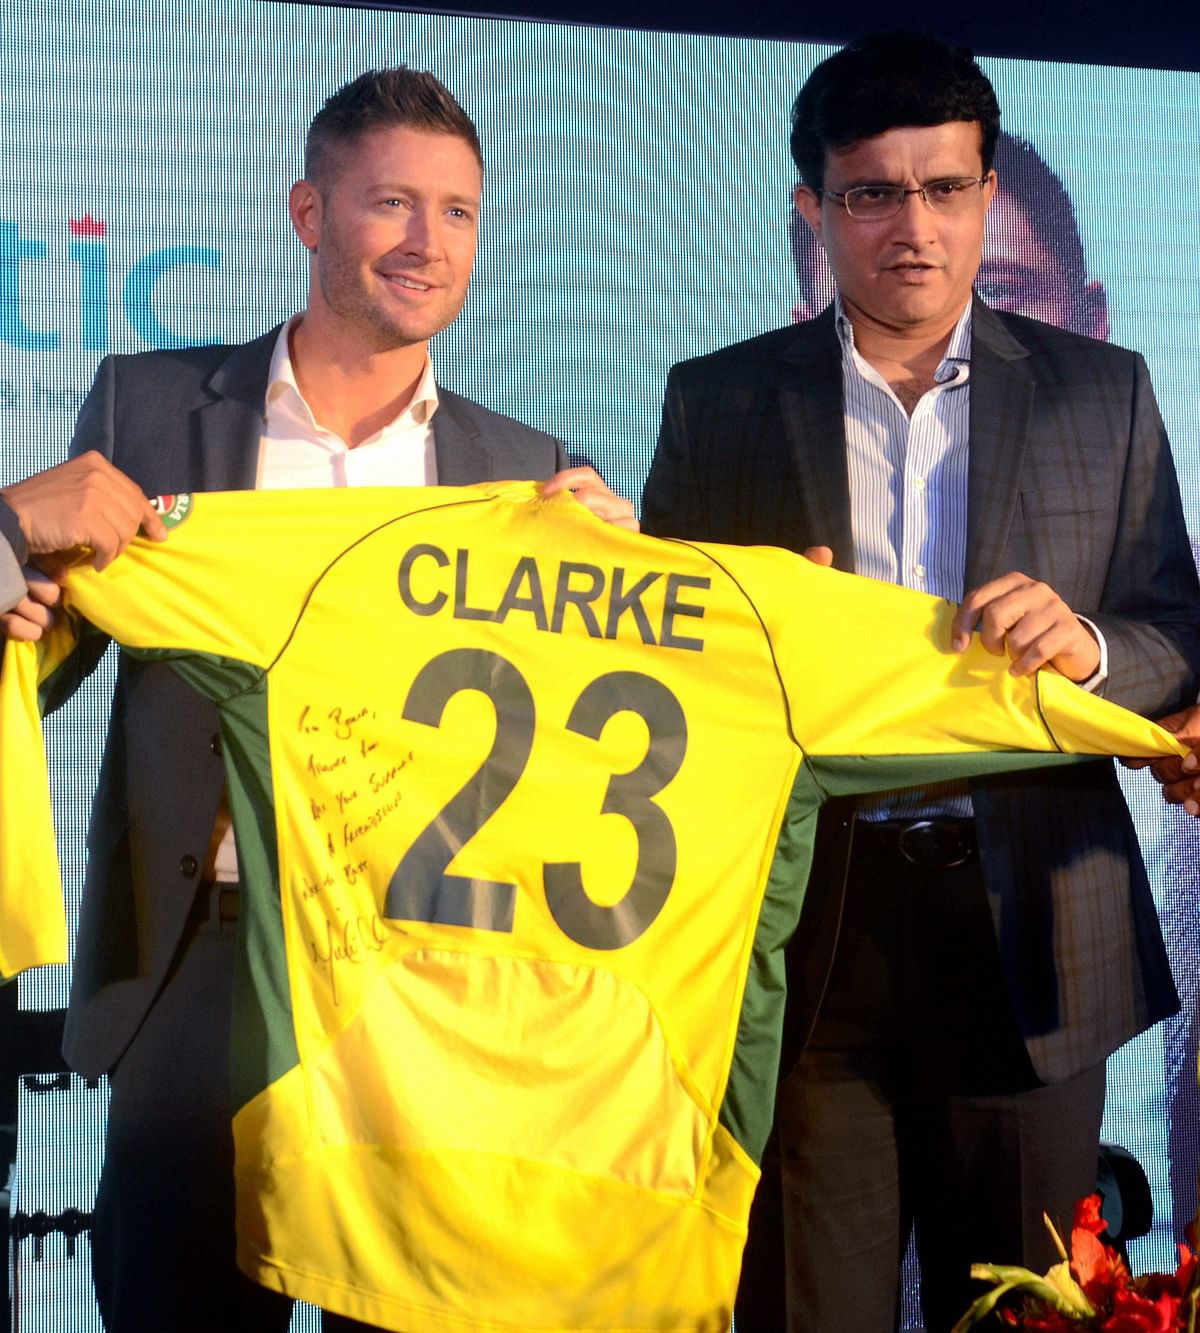 Michael Clarke lauded BCCI and Cricket Australia for their handling of the recent DRS controversy.